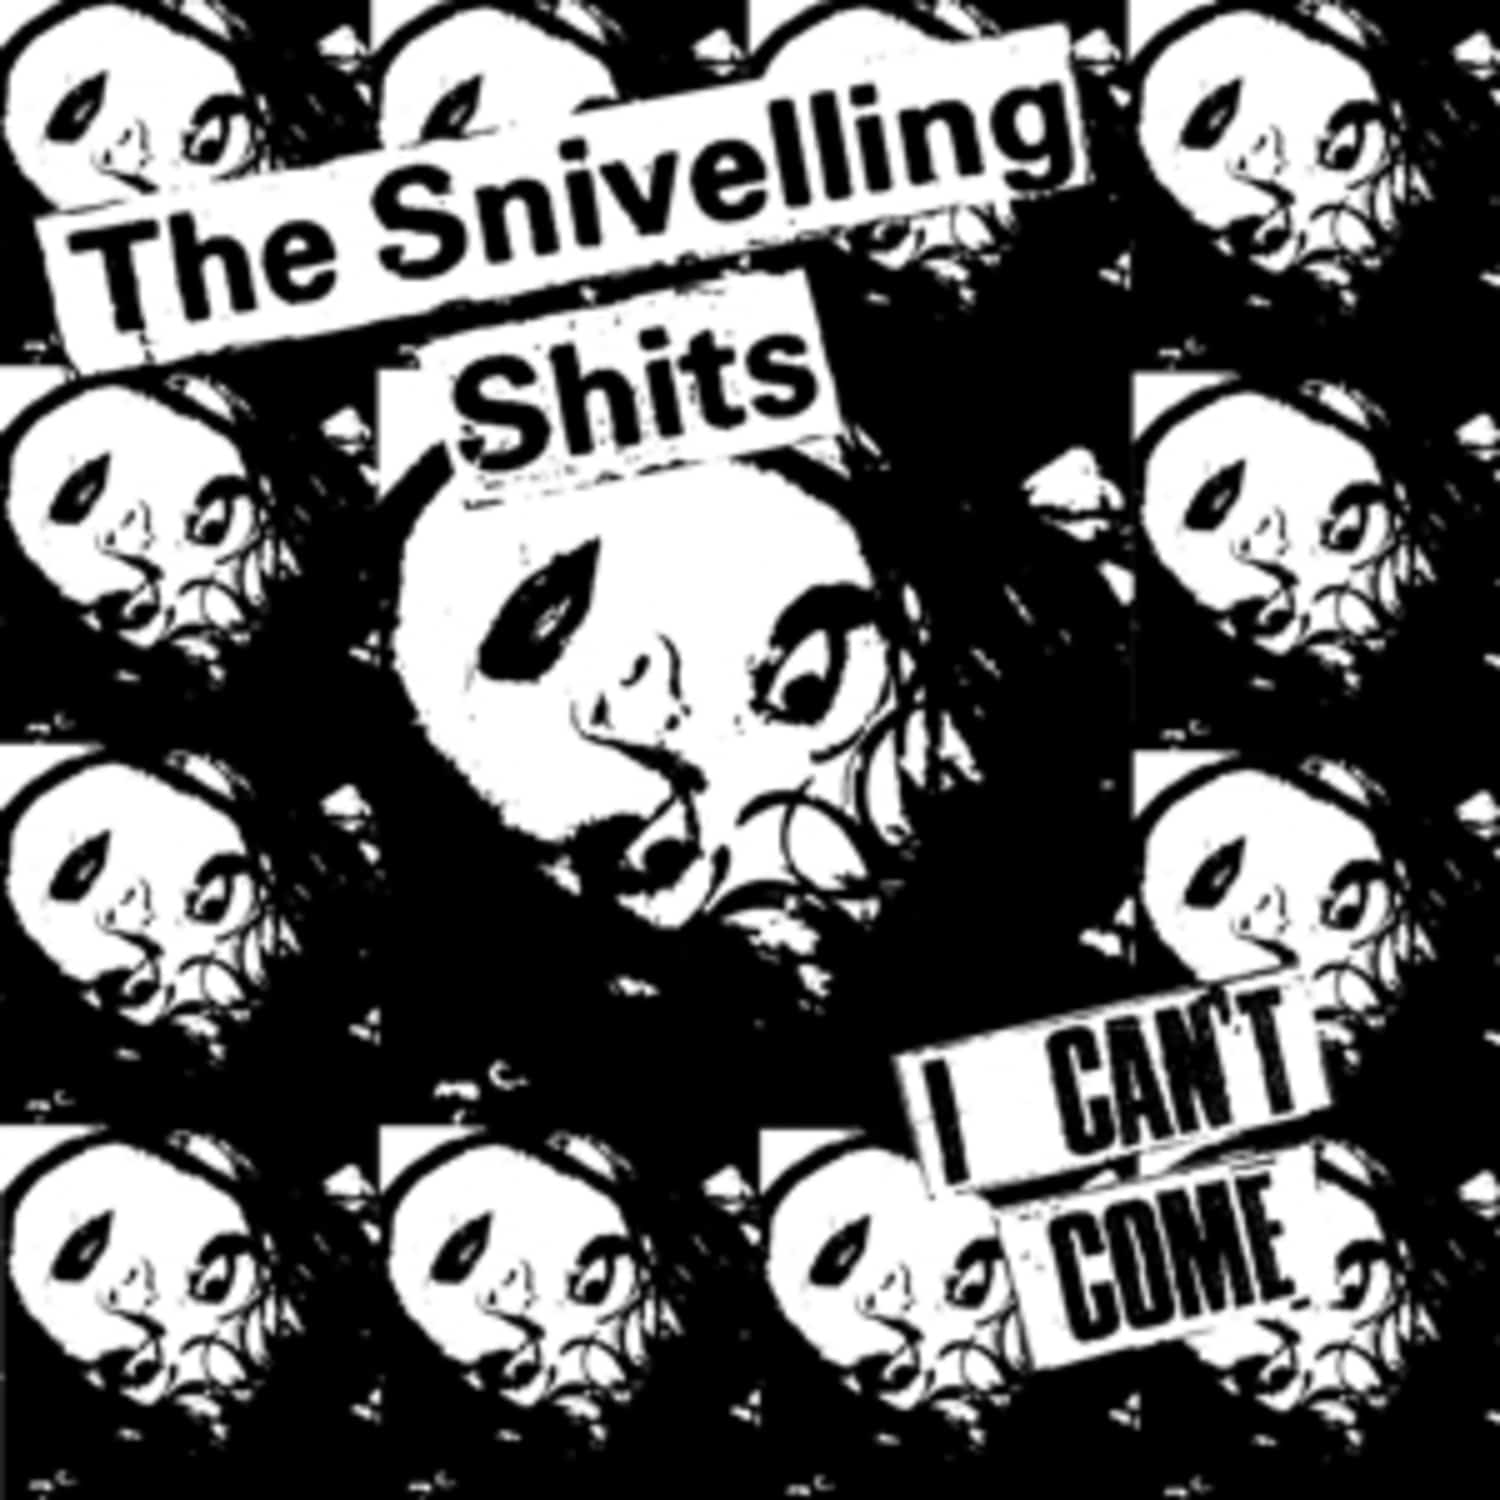 Snivelling Shits - I CAN T COME 